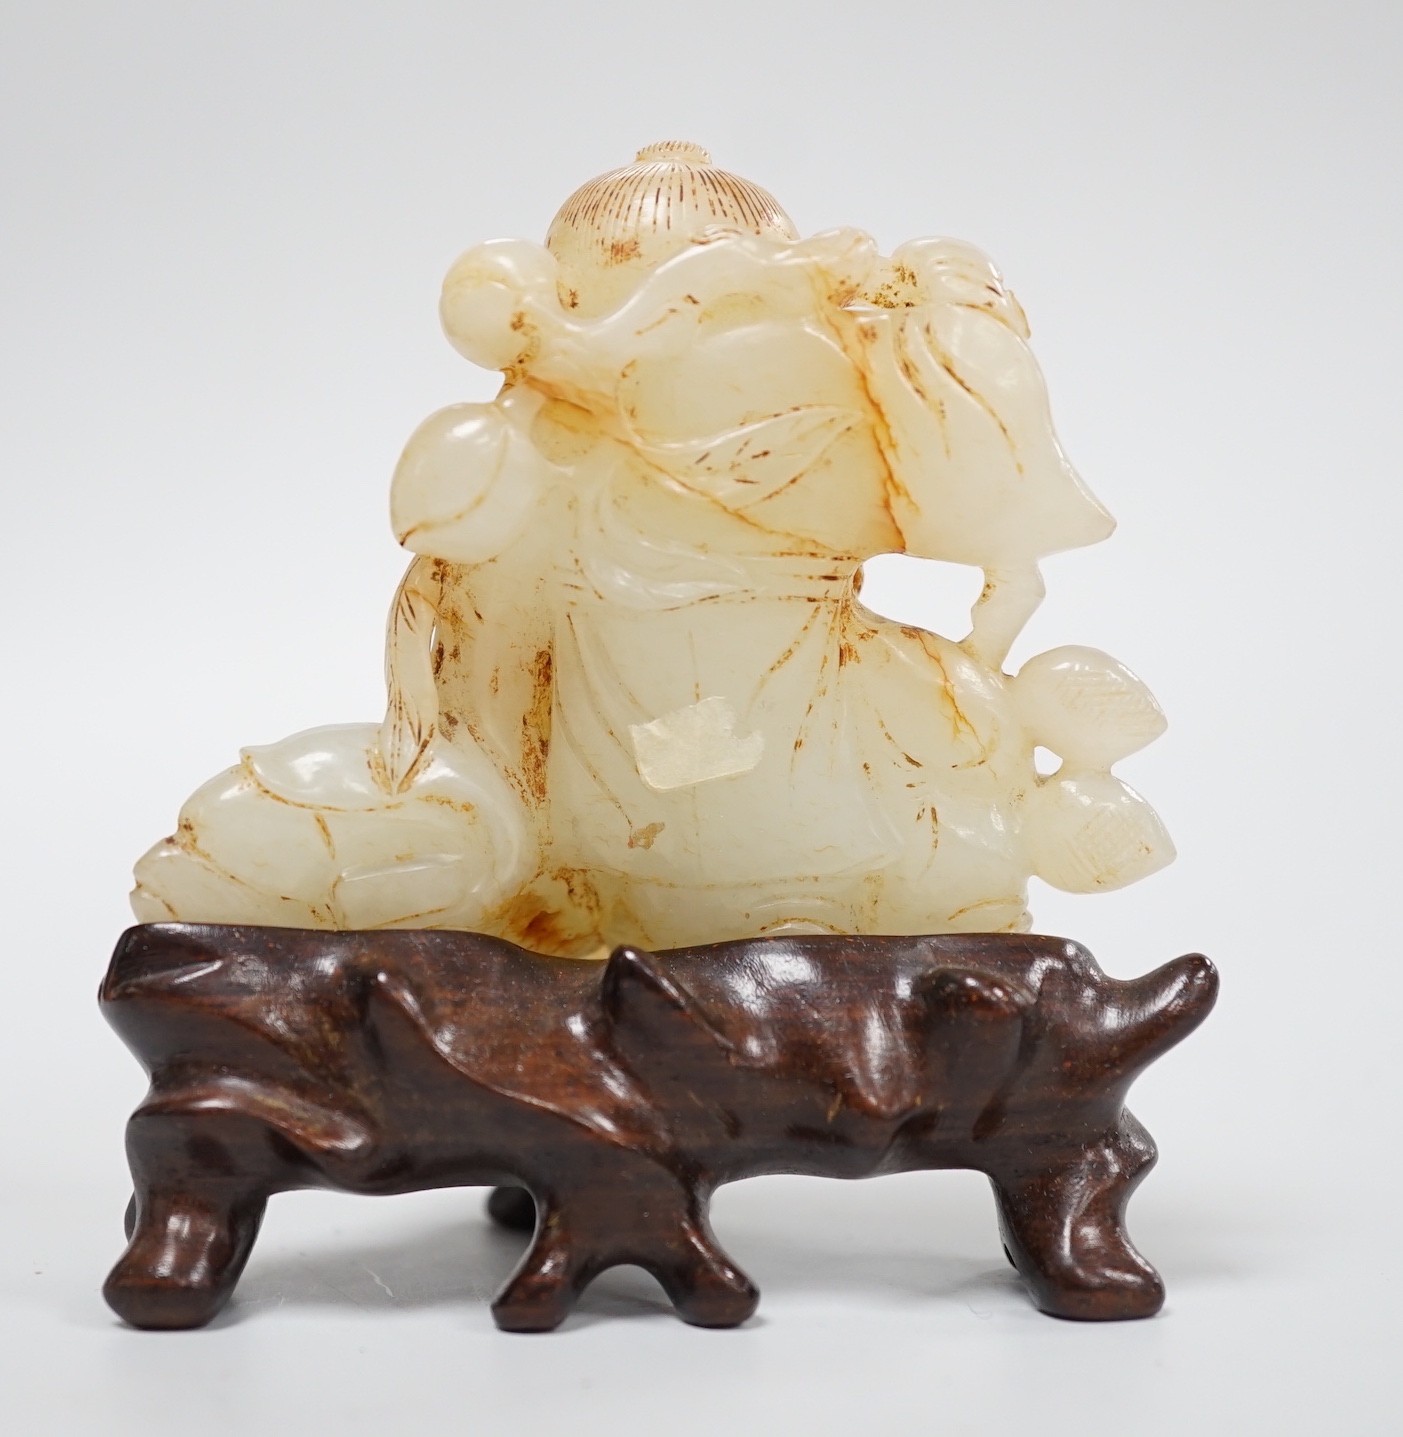 A Chinese white and russet jade group of three boys, 18th/19th century, 7.2 cm, wood stand